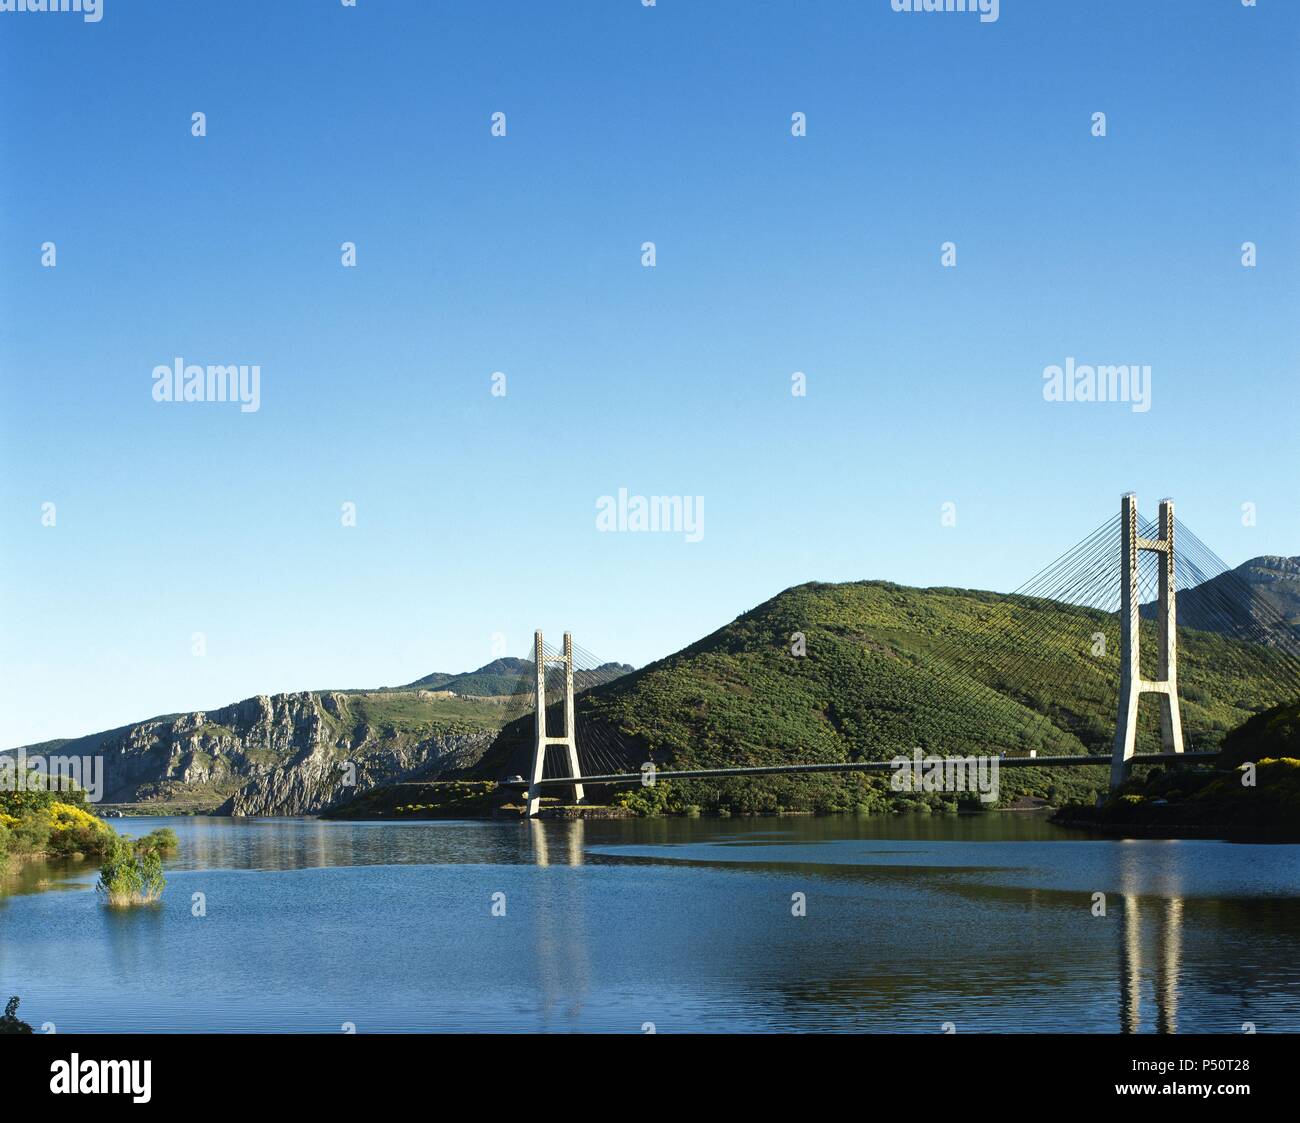 Spain. Castile and Leon. Barrios de Luna reservoir. Finished in 1956. At the background, the  motorway A-66 over the cable-stayed bridge. Stock Photo